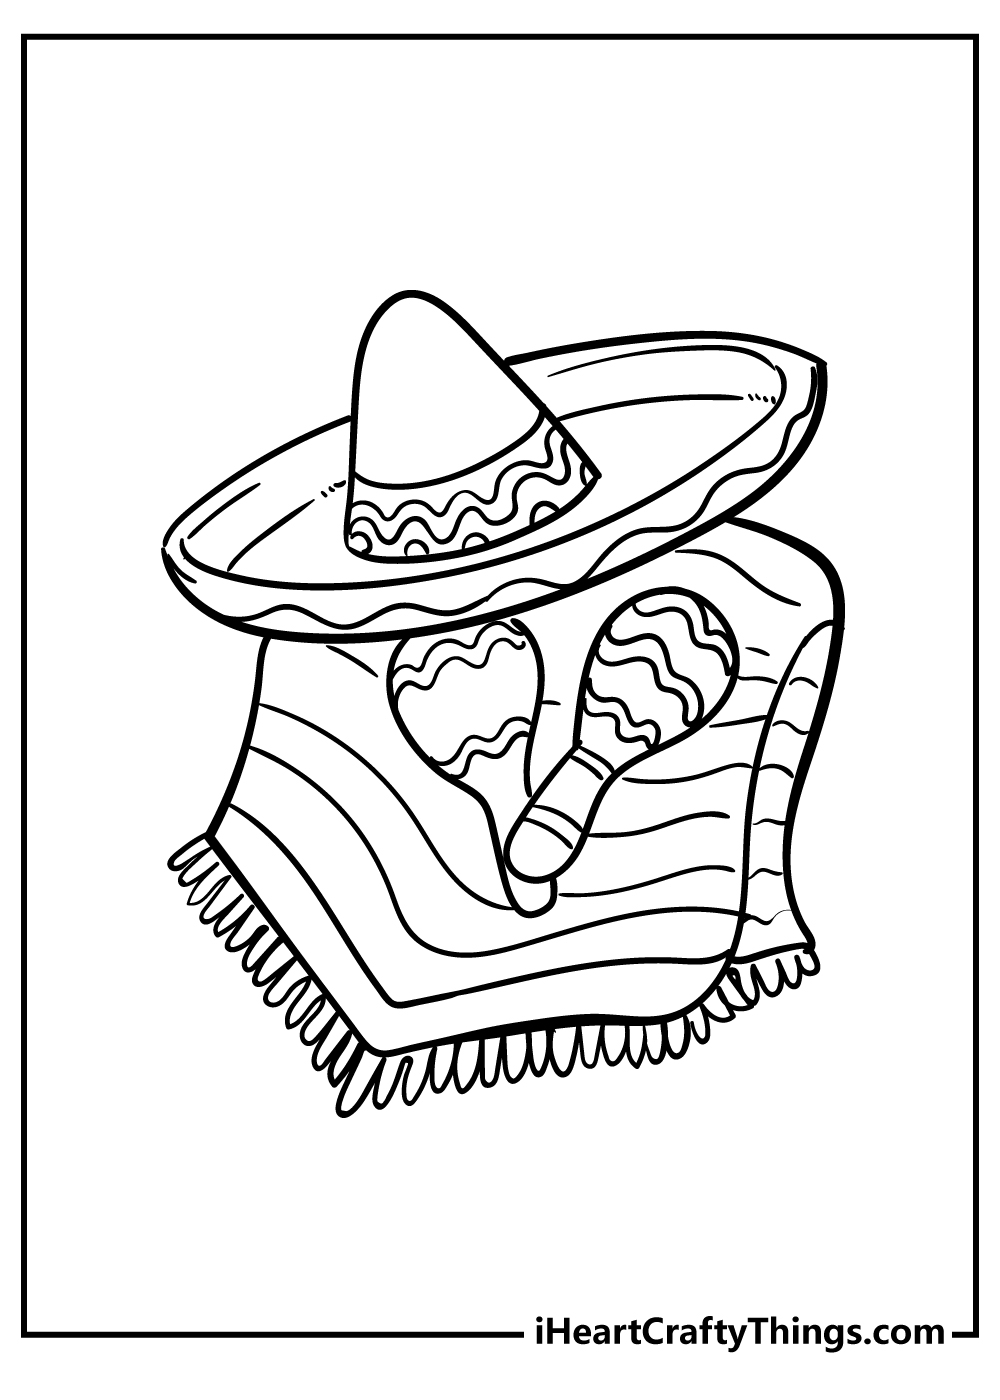 Mexican Coloring Book for adults free download